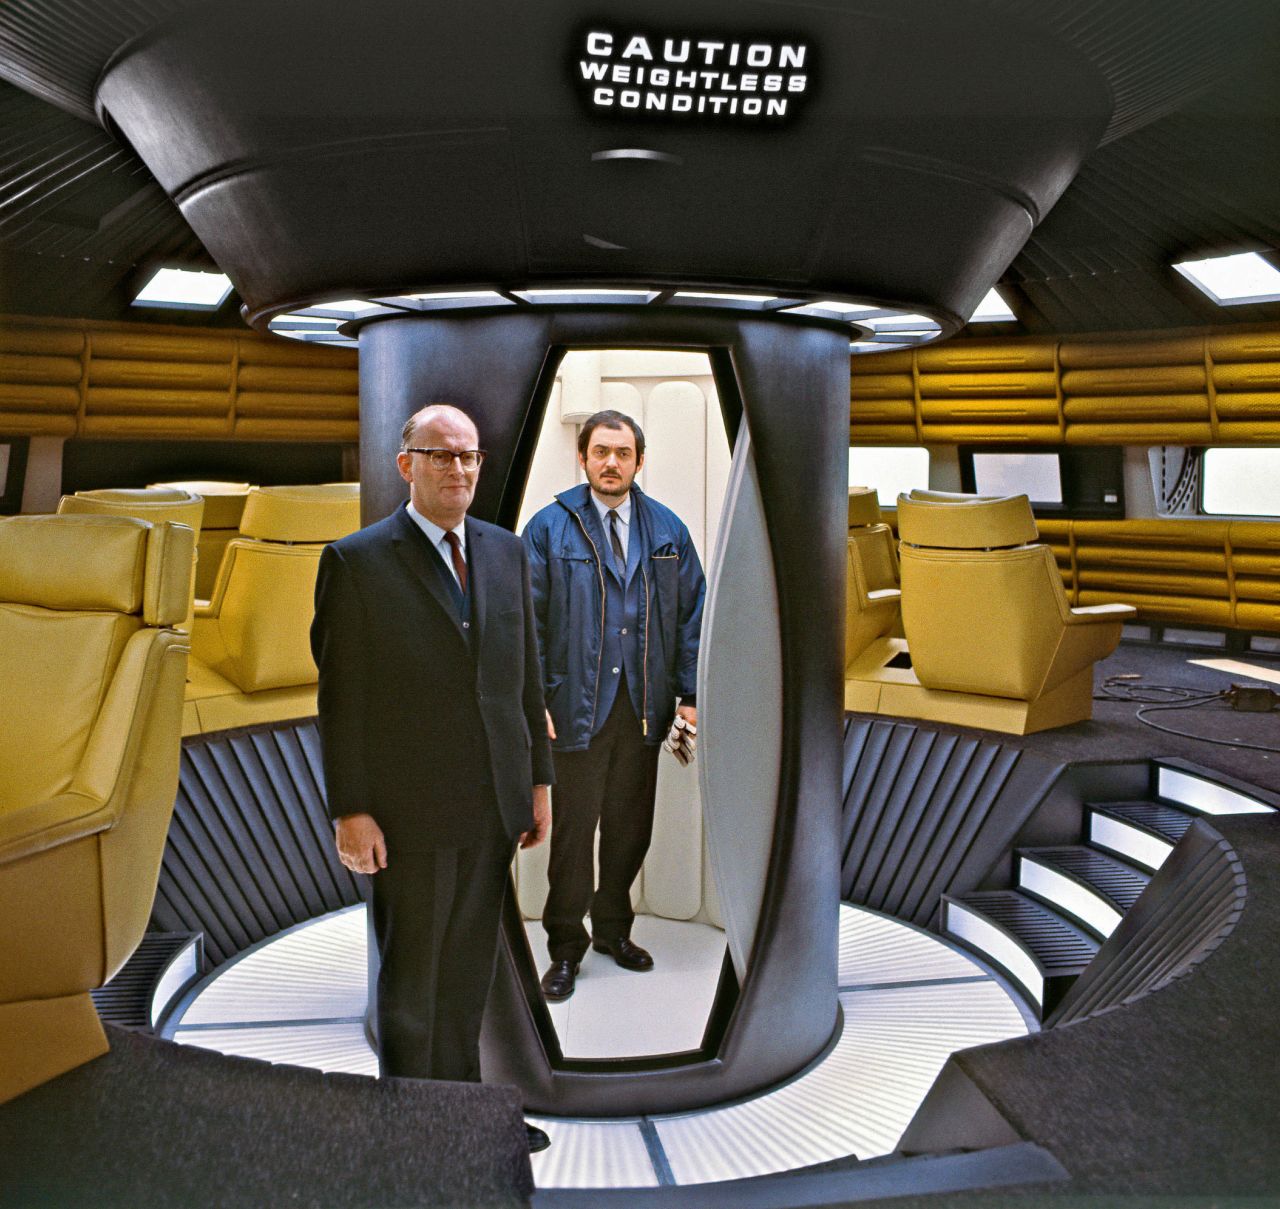 Stanley Kubrick and Arthur C. Clarke, who wrote the "2001: A Space Odyssey" novel and collaborated with Kubrick on the screenplay,  on set of the Aries lunar ferry.